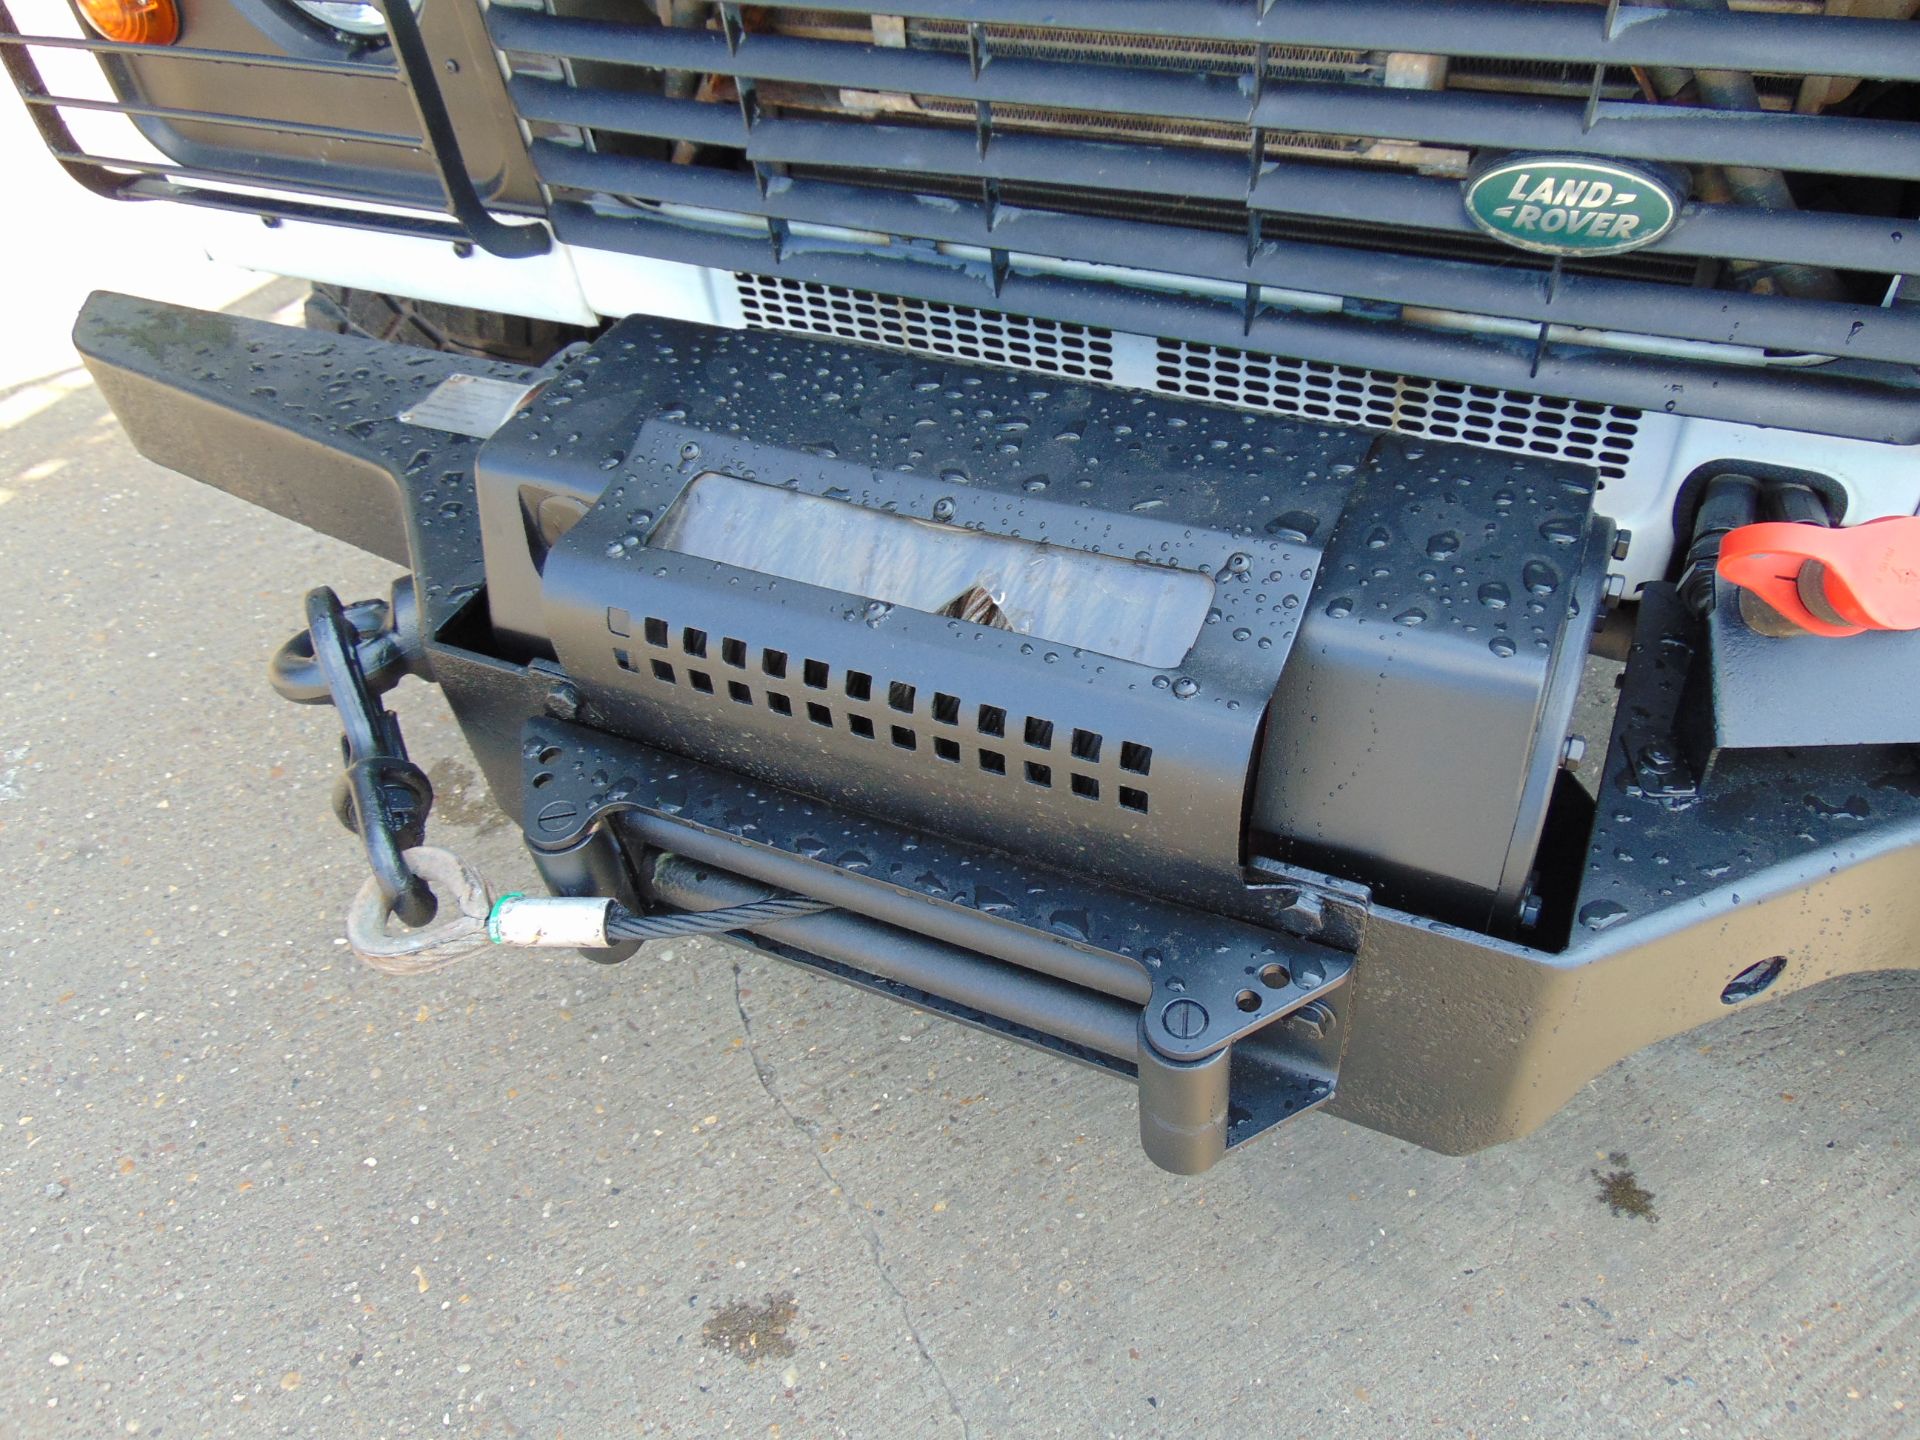 2011 Land Rover Defender 110 Puma hardtop 4x4 Utility vehicle (mobile workshop) with hydraulic winch - Image 15 of 53